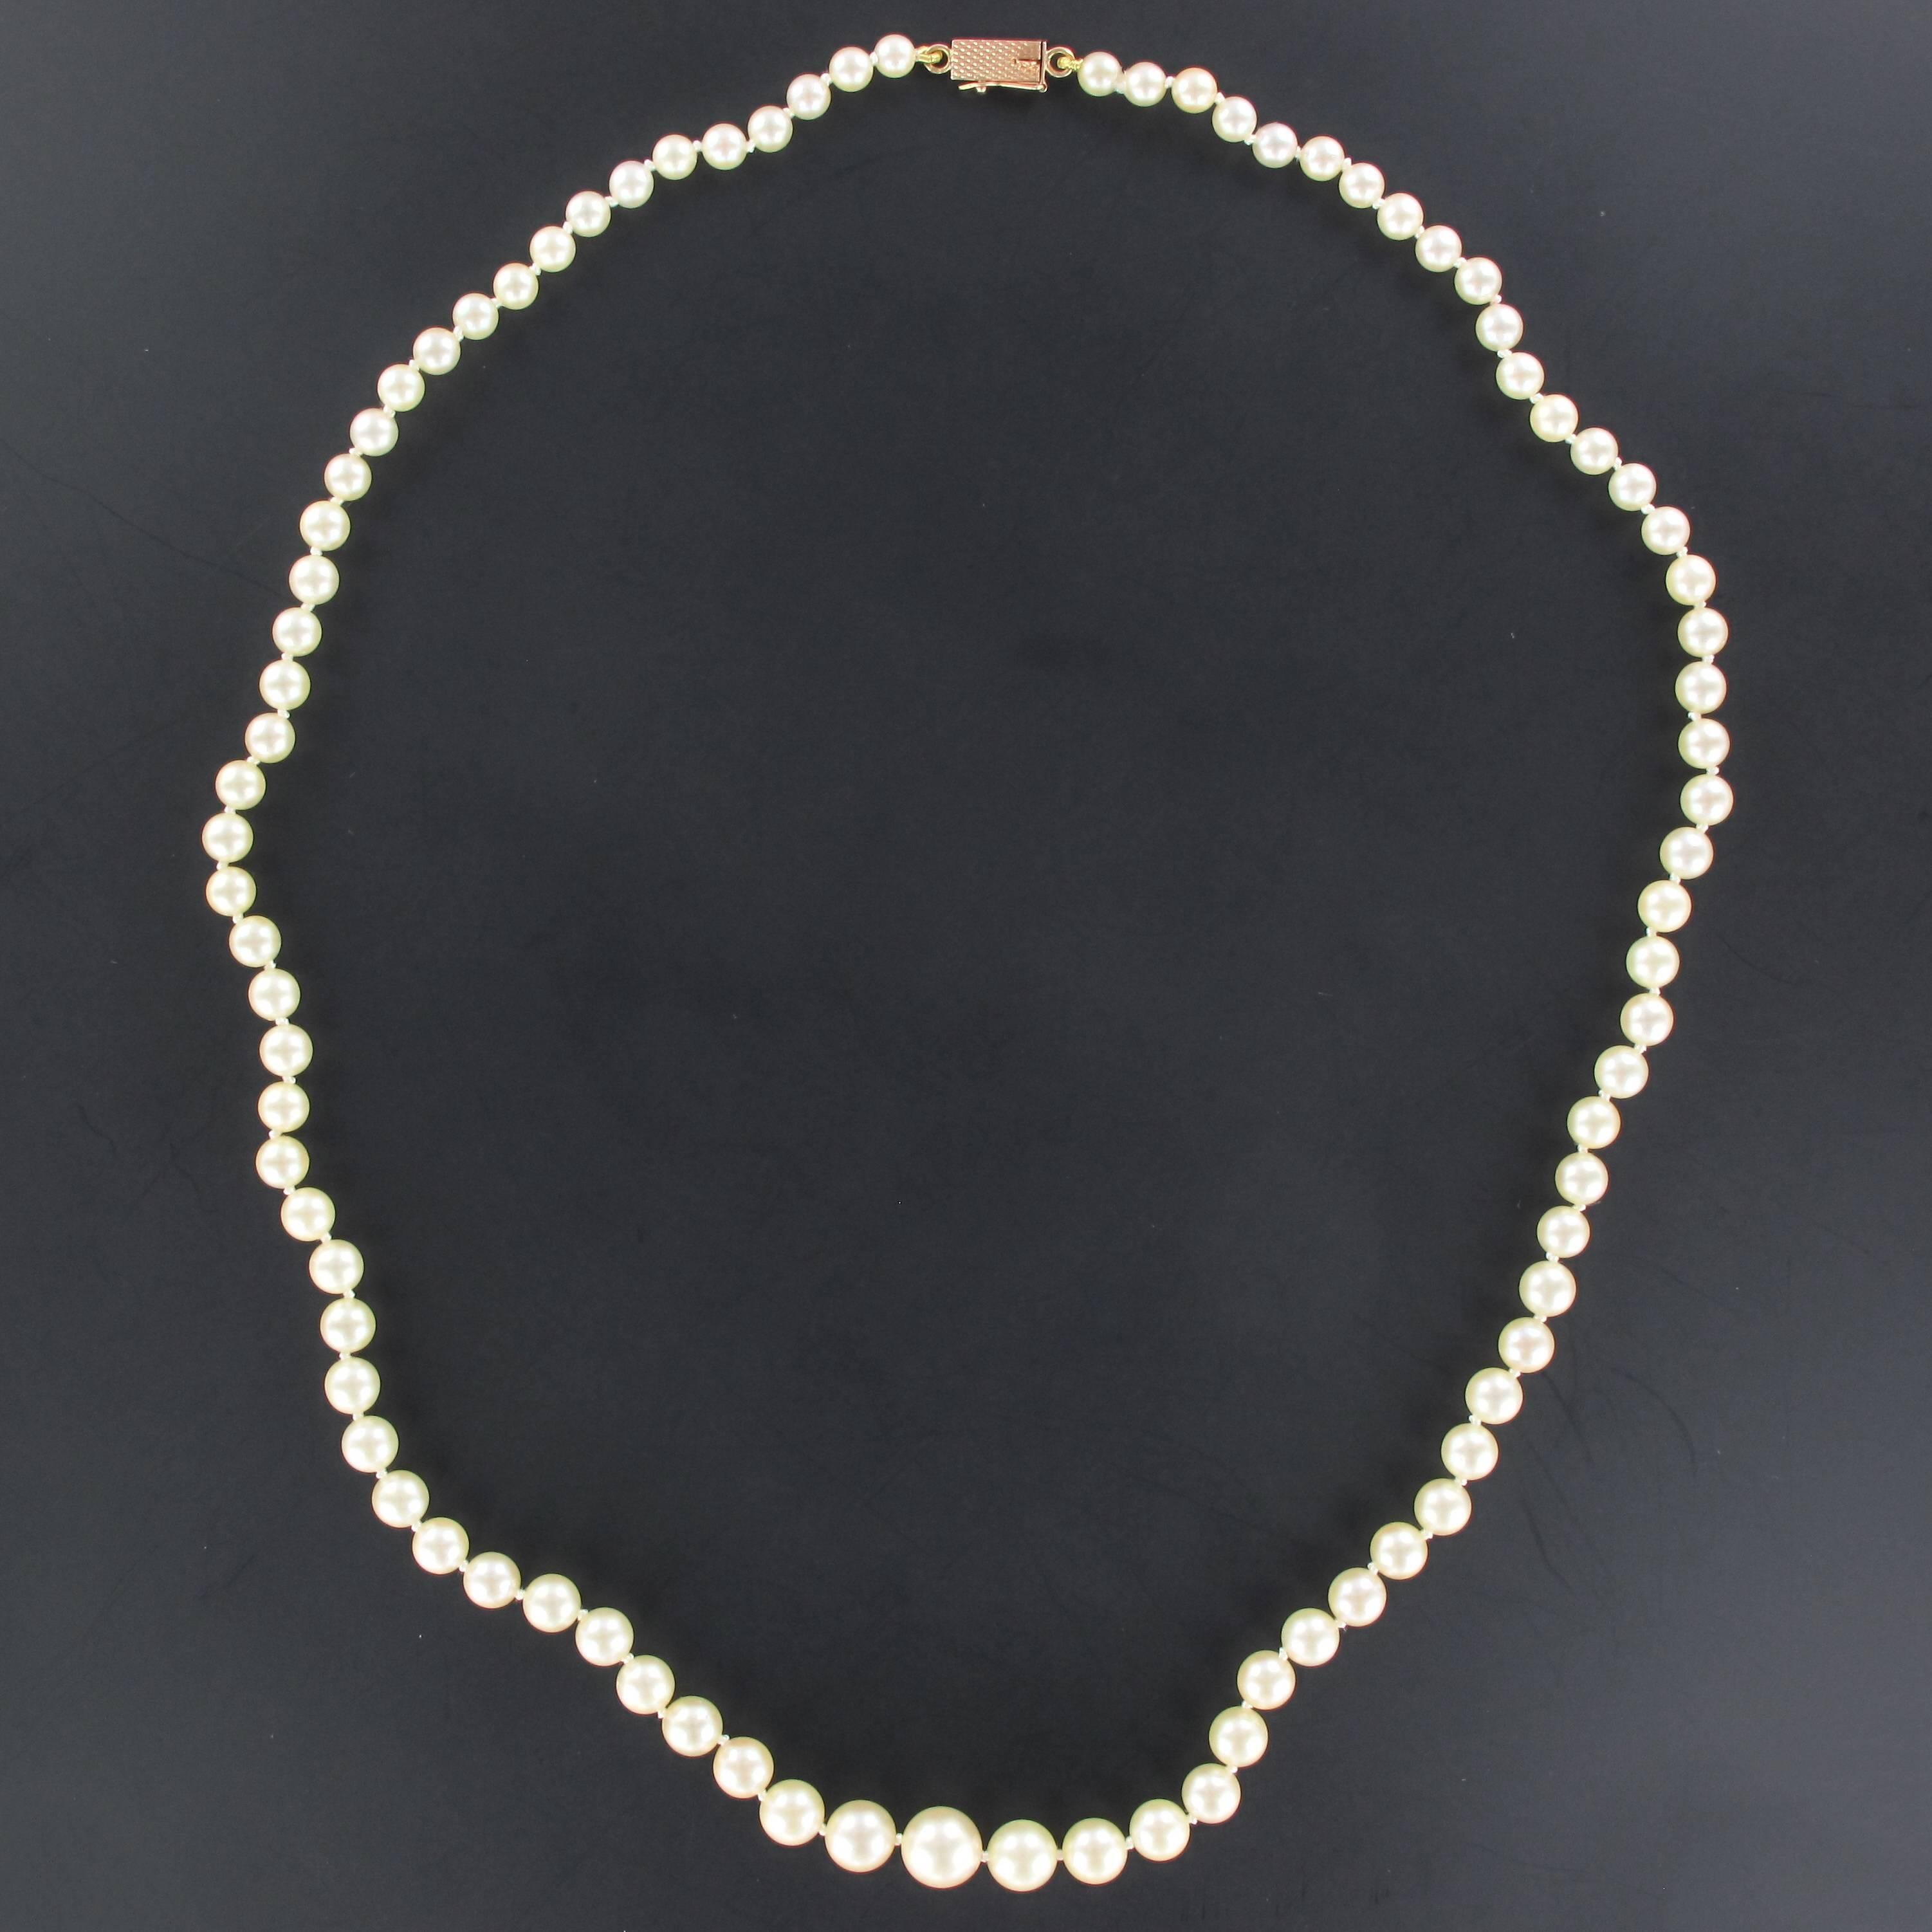 This pearl necklace is composed of a strand of Japanese cultured pearls which are held together by an 18 carats rectangular rose gold clasp. 
Diameter of the pearls: 5,5/6 mm.
Overall length: 55,5 cm.
Total weight: approximately 21,1 g.
The necklace